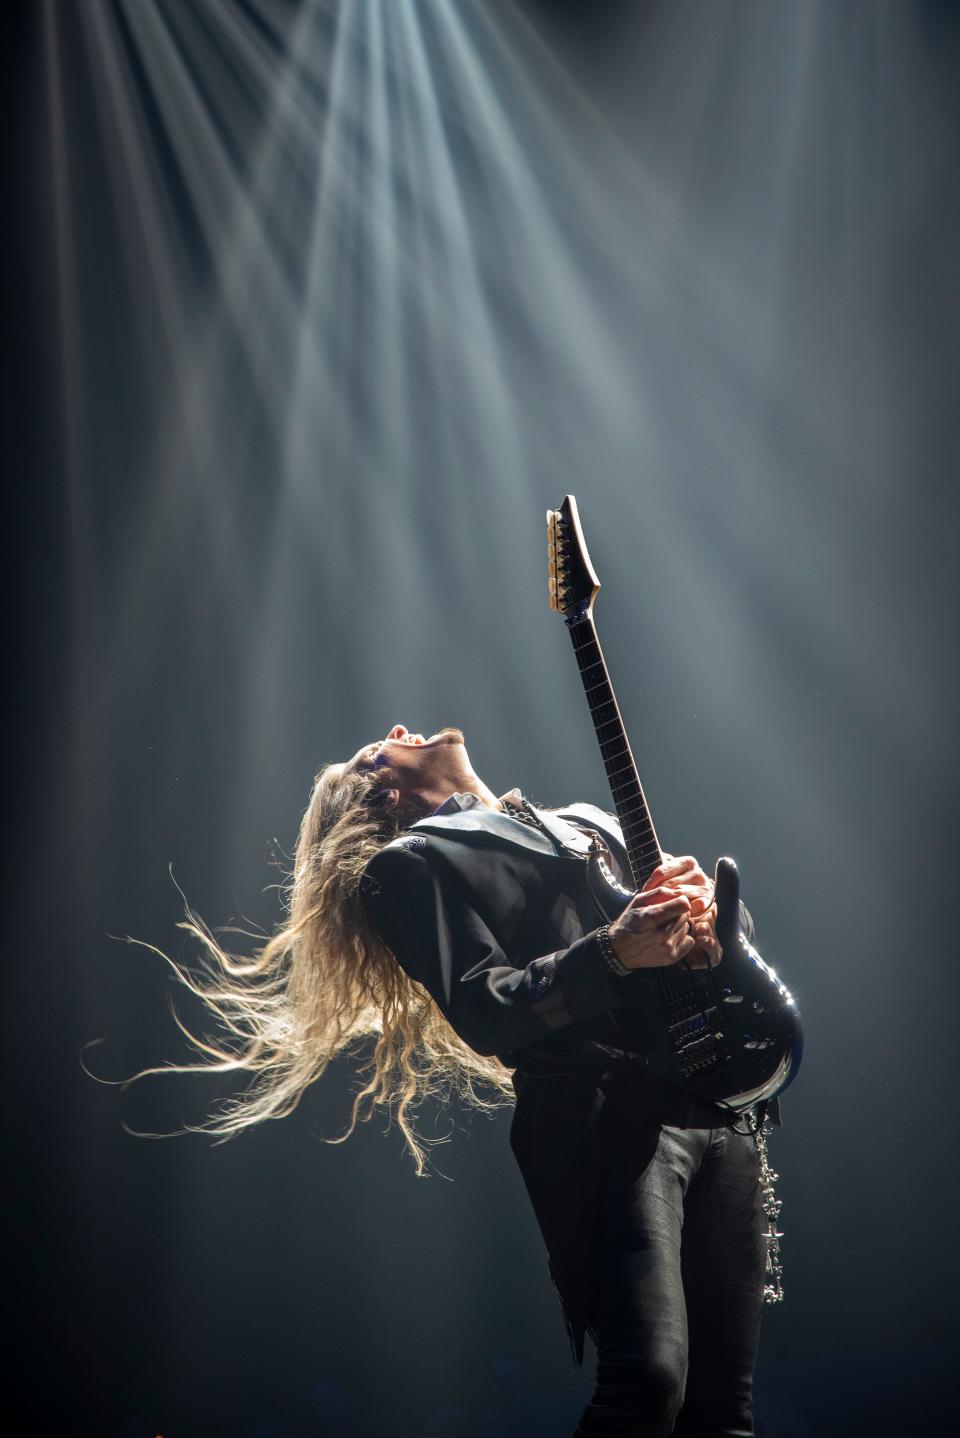 The Trans-Siberian Orchestra will meld rock music with holiday fare at a FedExForum concert in December.